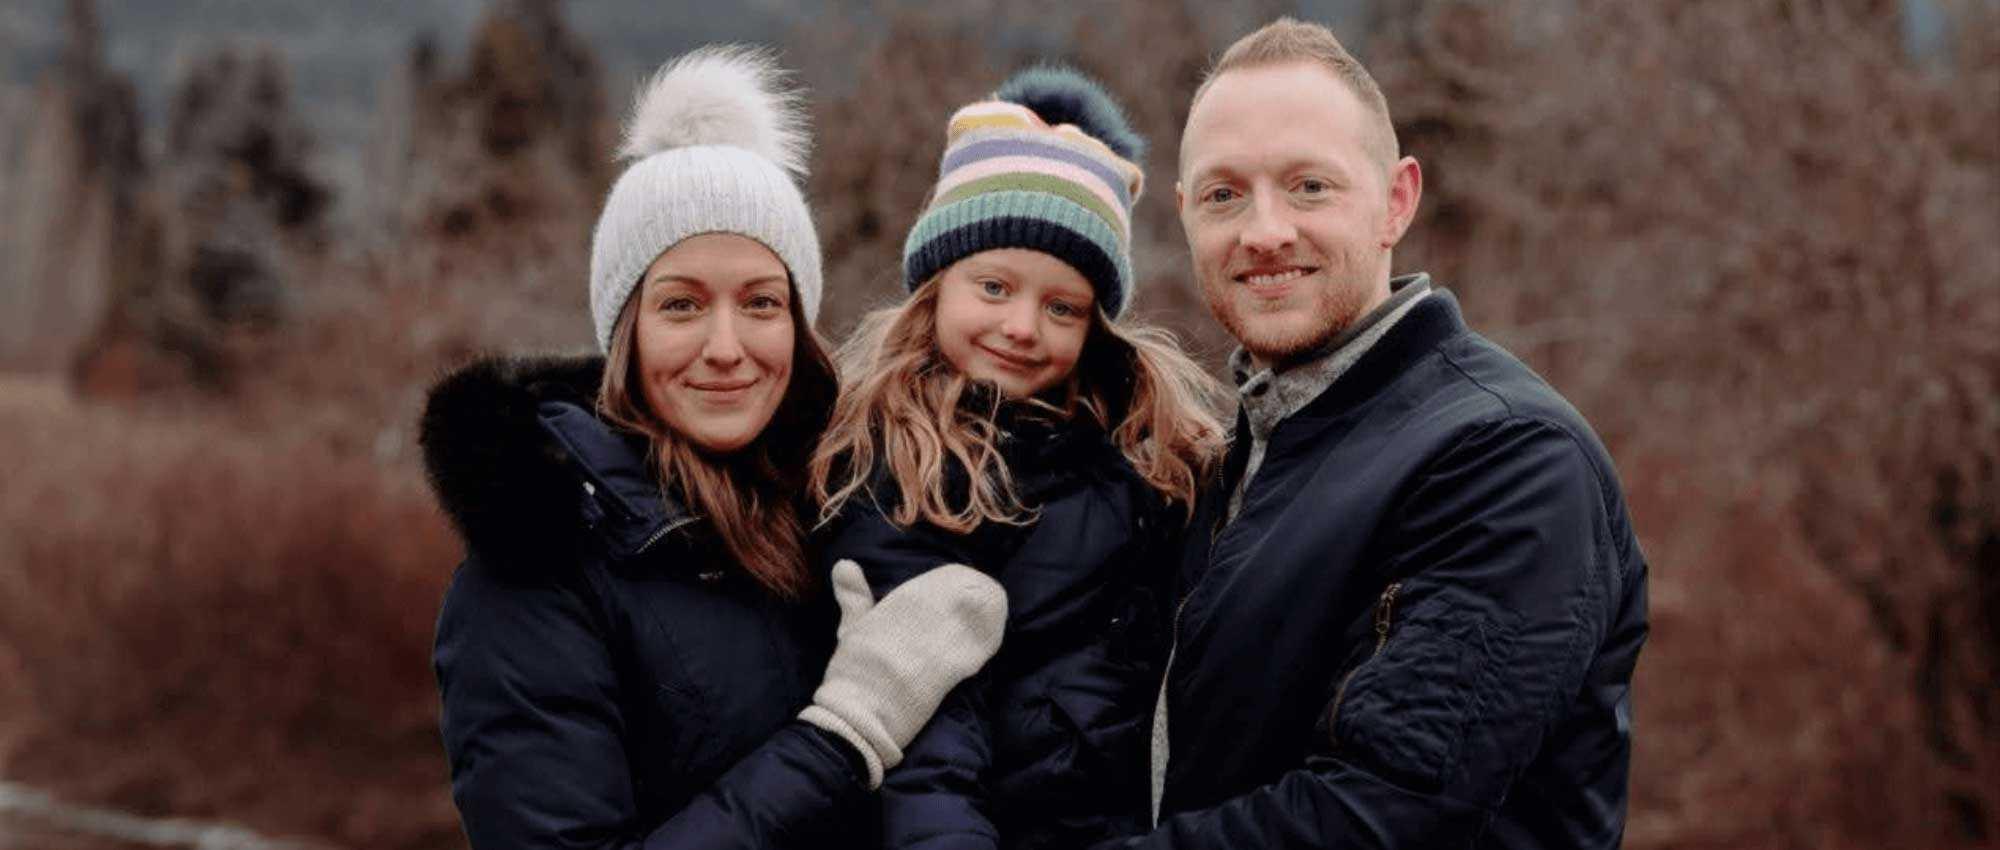 Blood and stem cell recipient, Miranda Webber with her daughter and husband